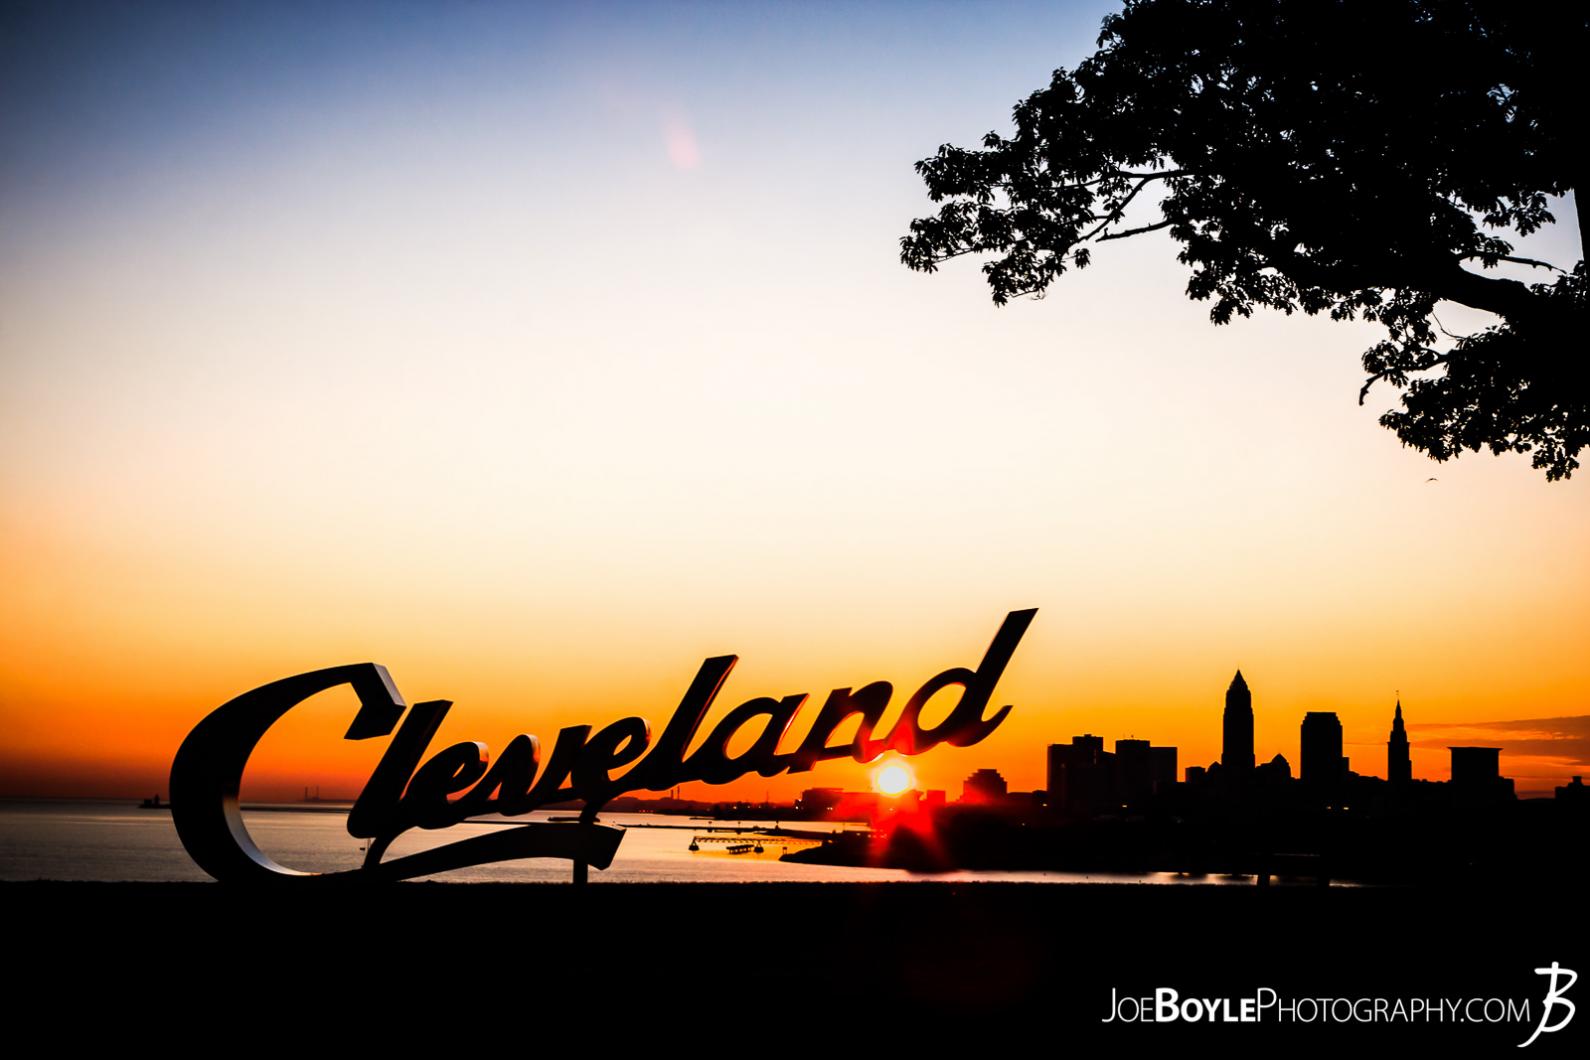 cleveland-sign-during-sunrise-at-edgewater-park-city-beneath-the-sign-ii